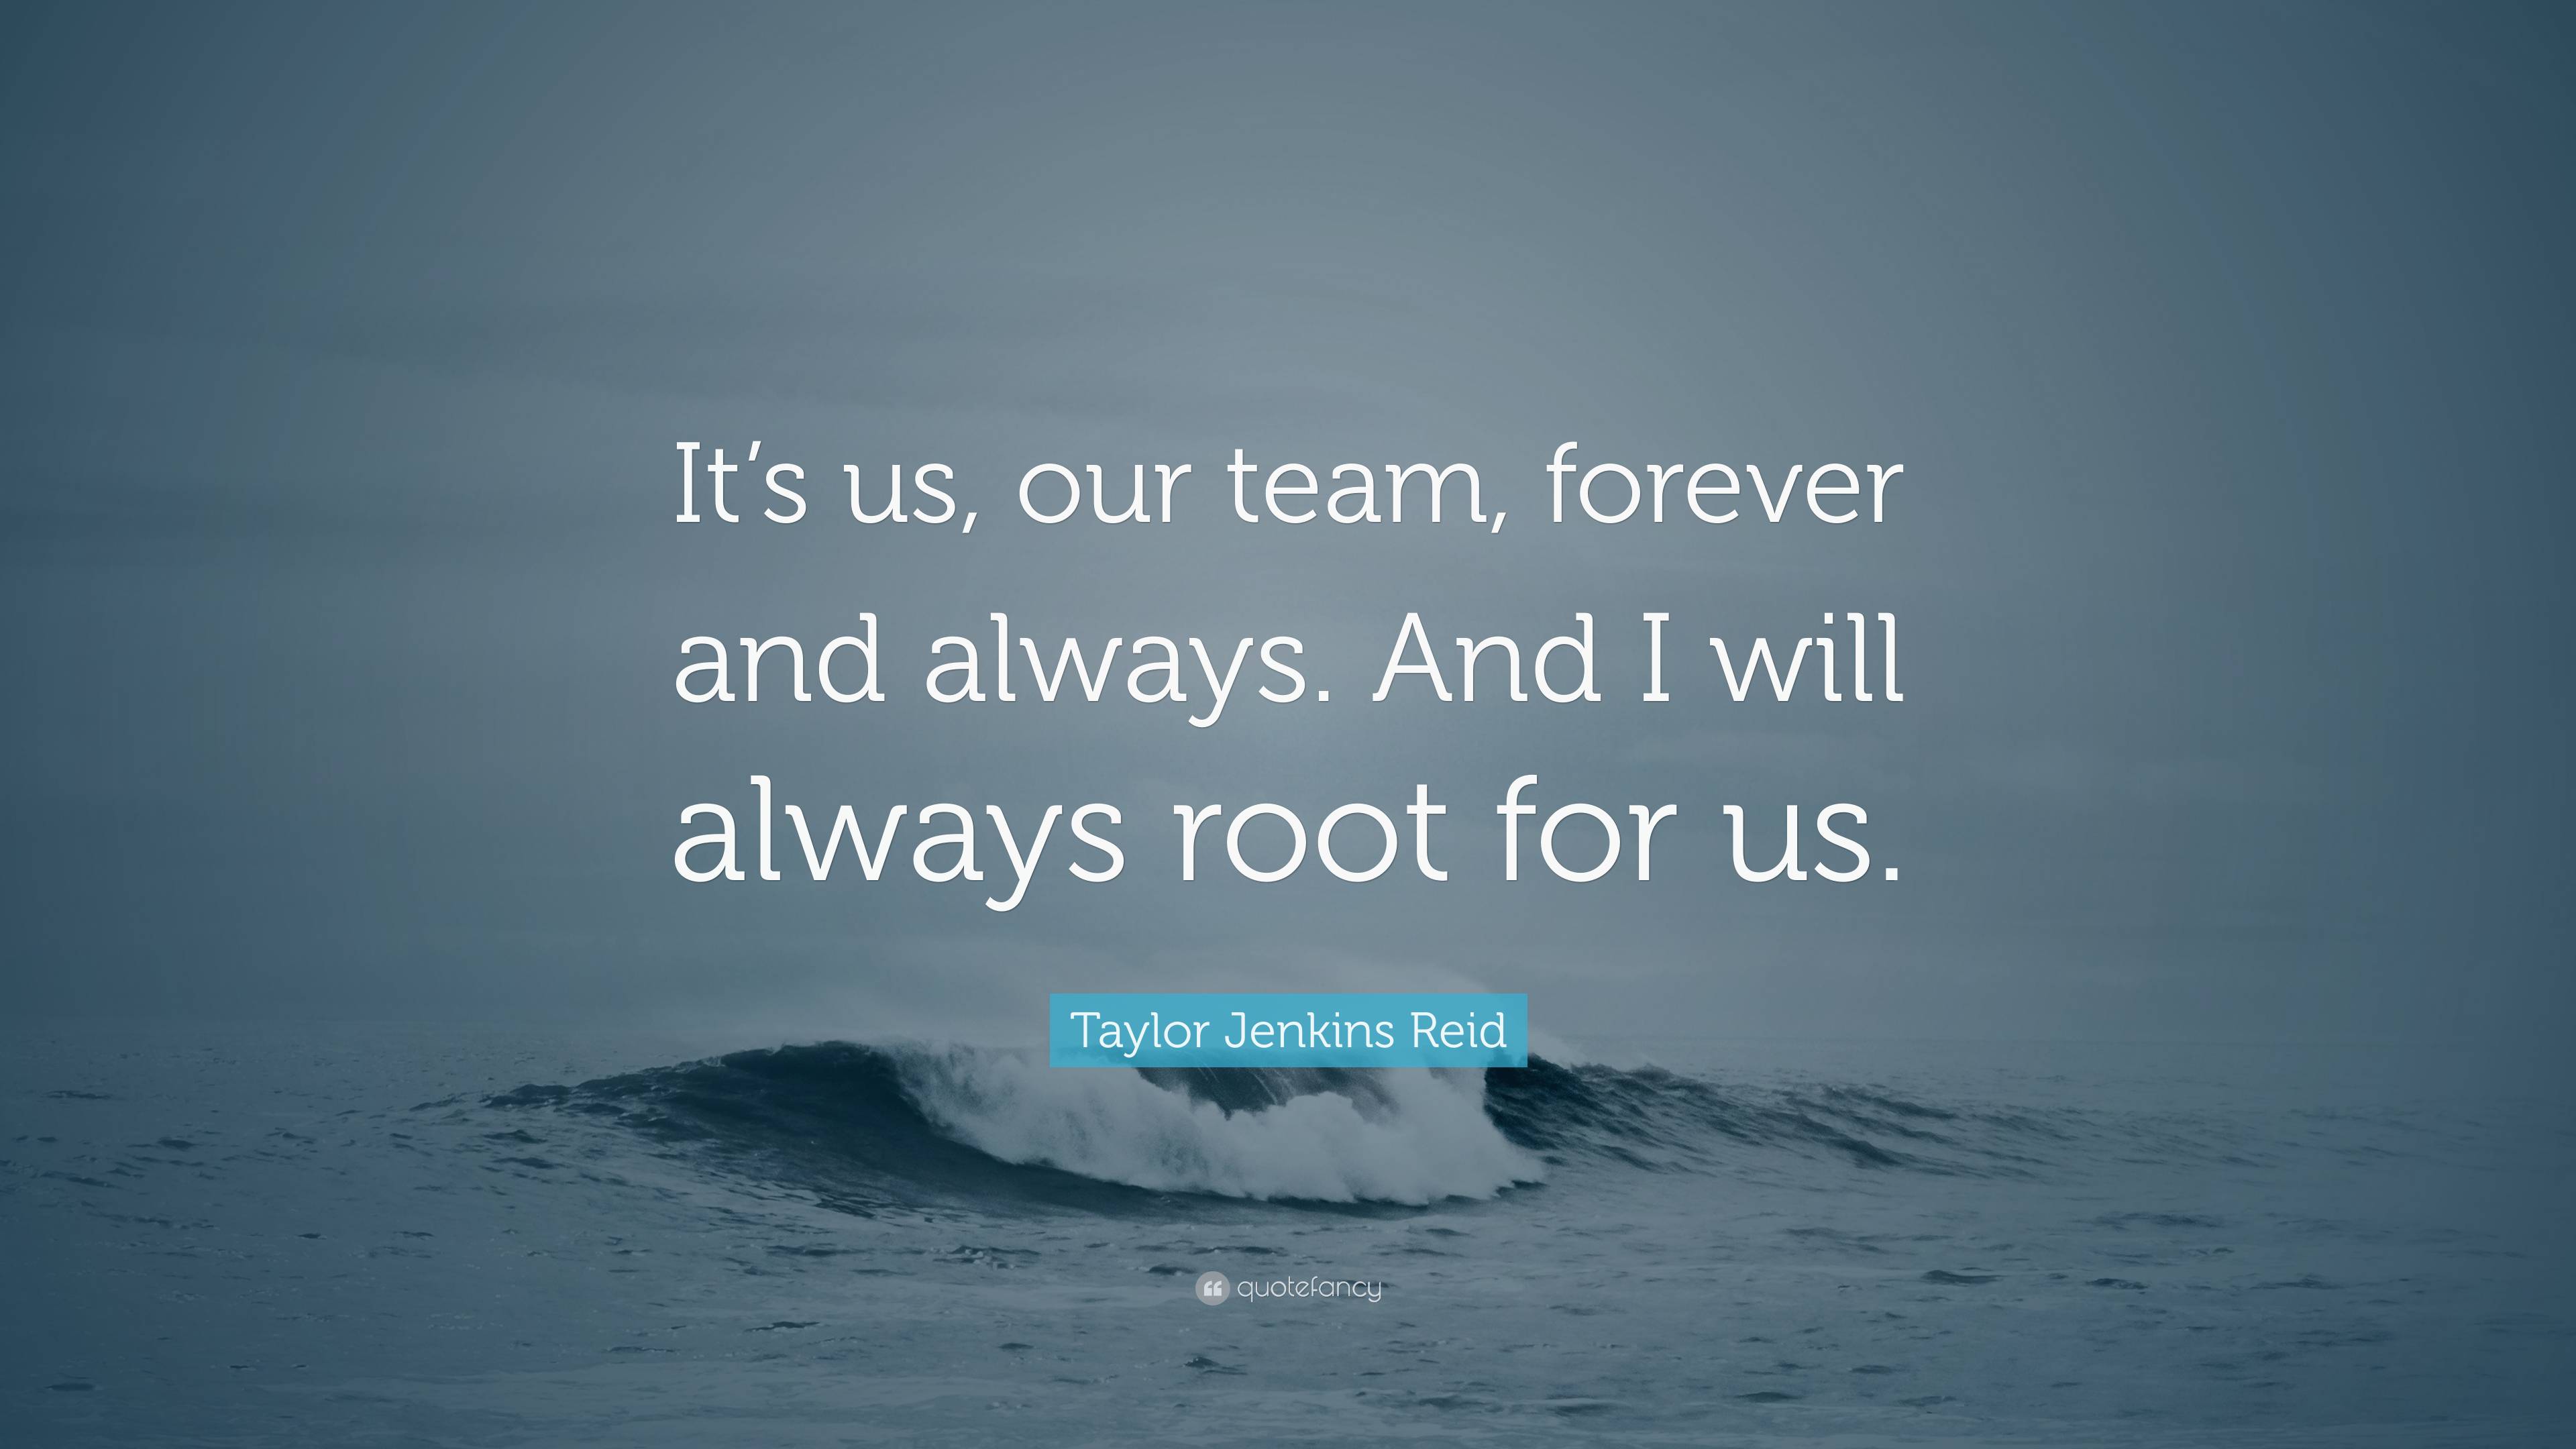 About  Team Forever